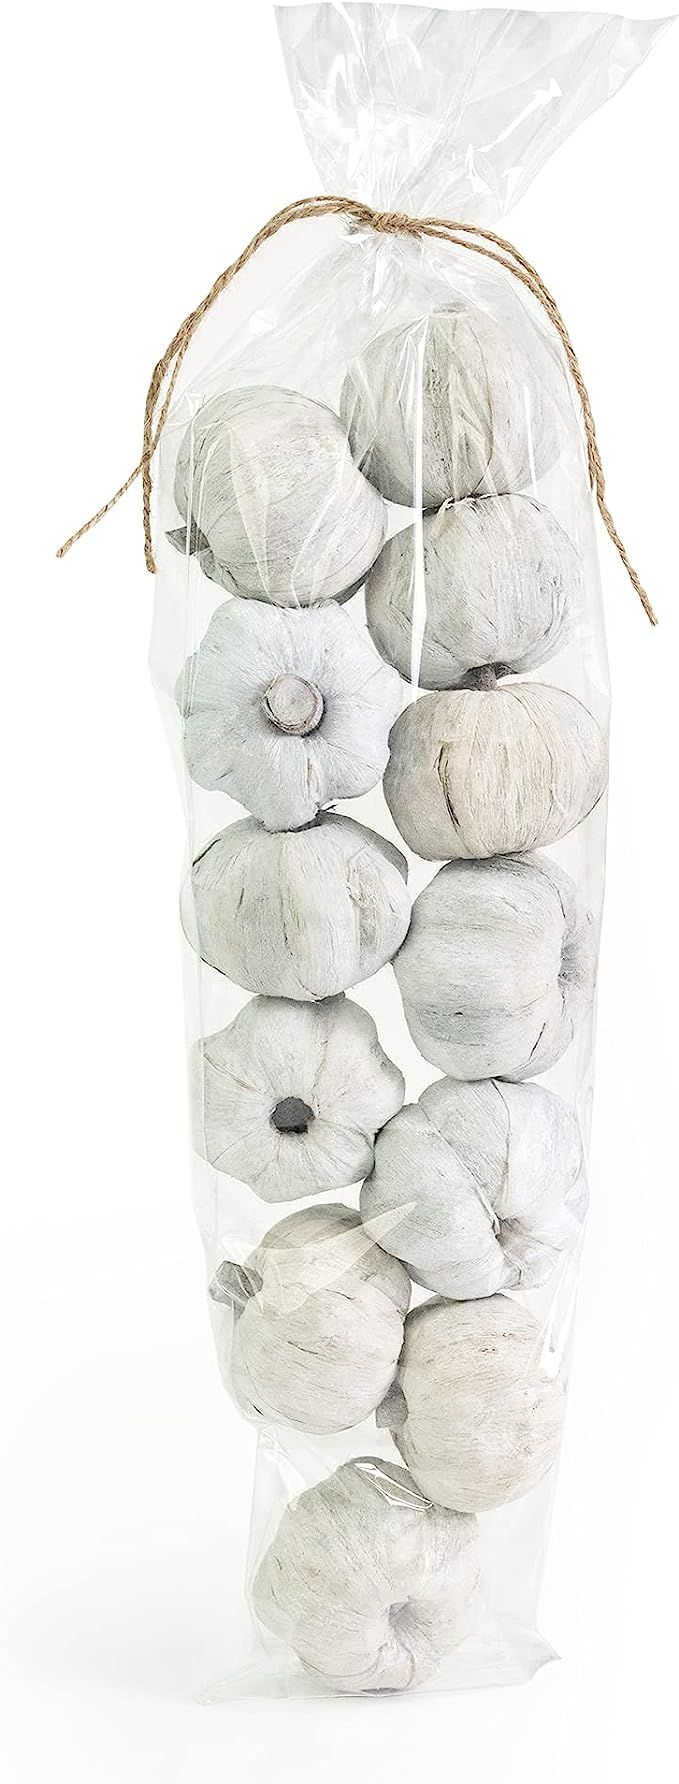 ANDALUCA Natural Vase Fillers White Miniature Pumpkins | for Arts & Crafts, Home Decor & Hallowee... | Amazon (US)